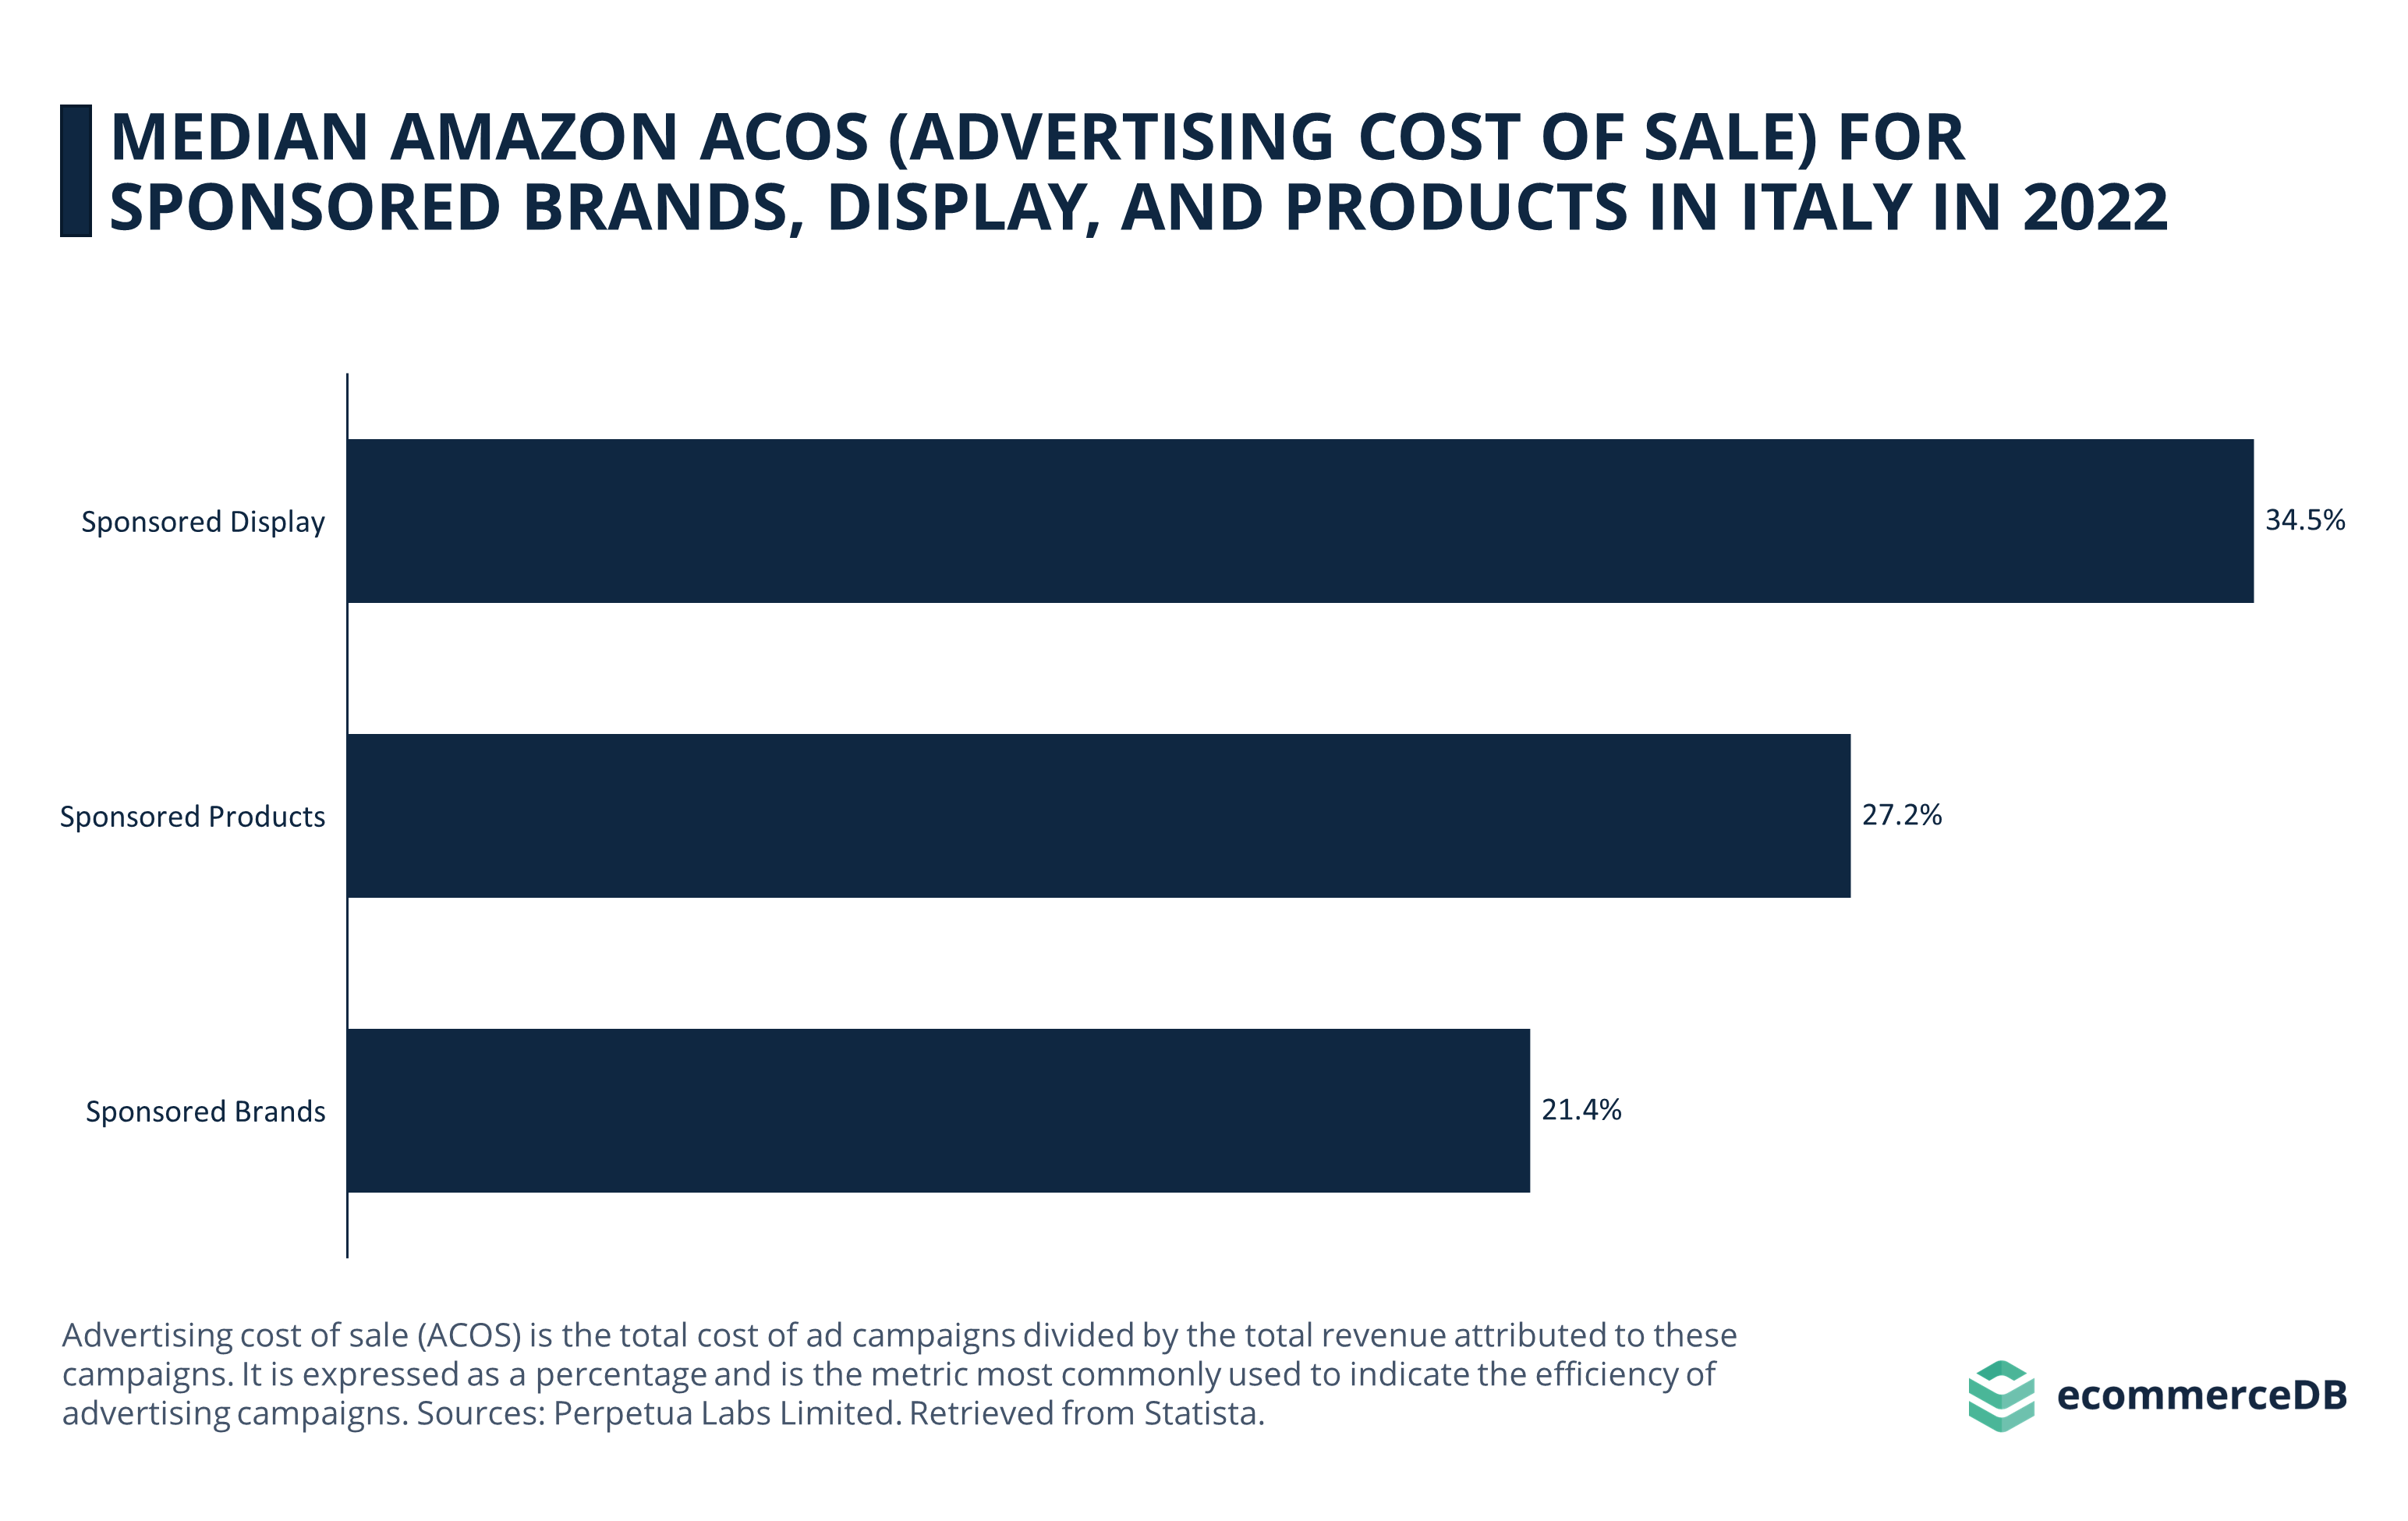 Median Amazon ACOS for 3 Ad Types in Italy